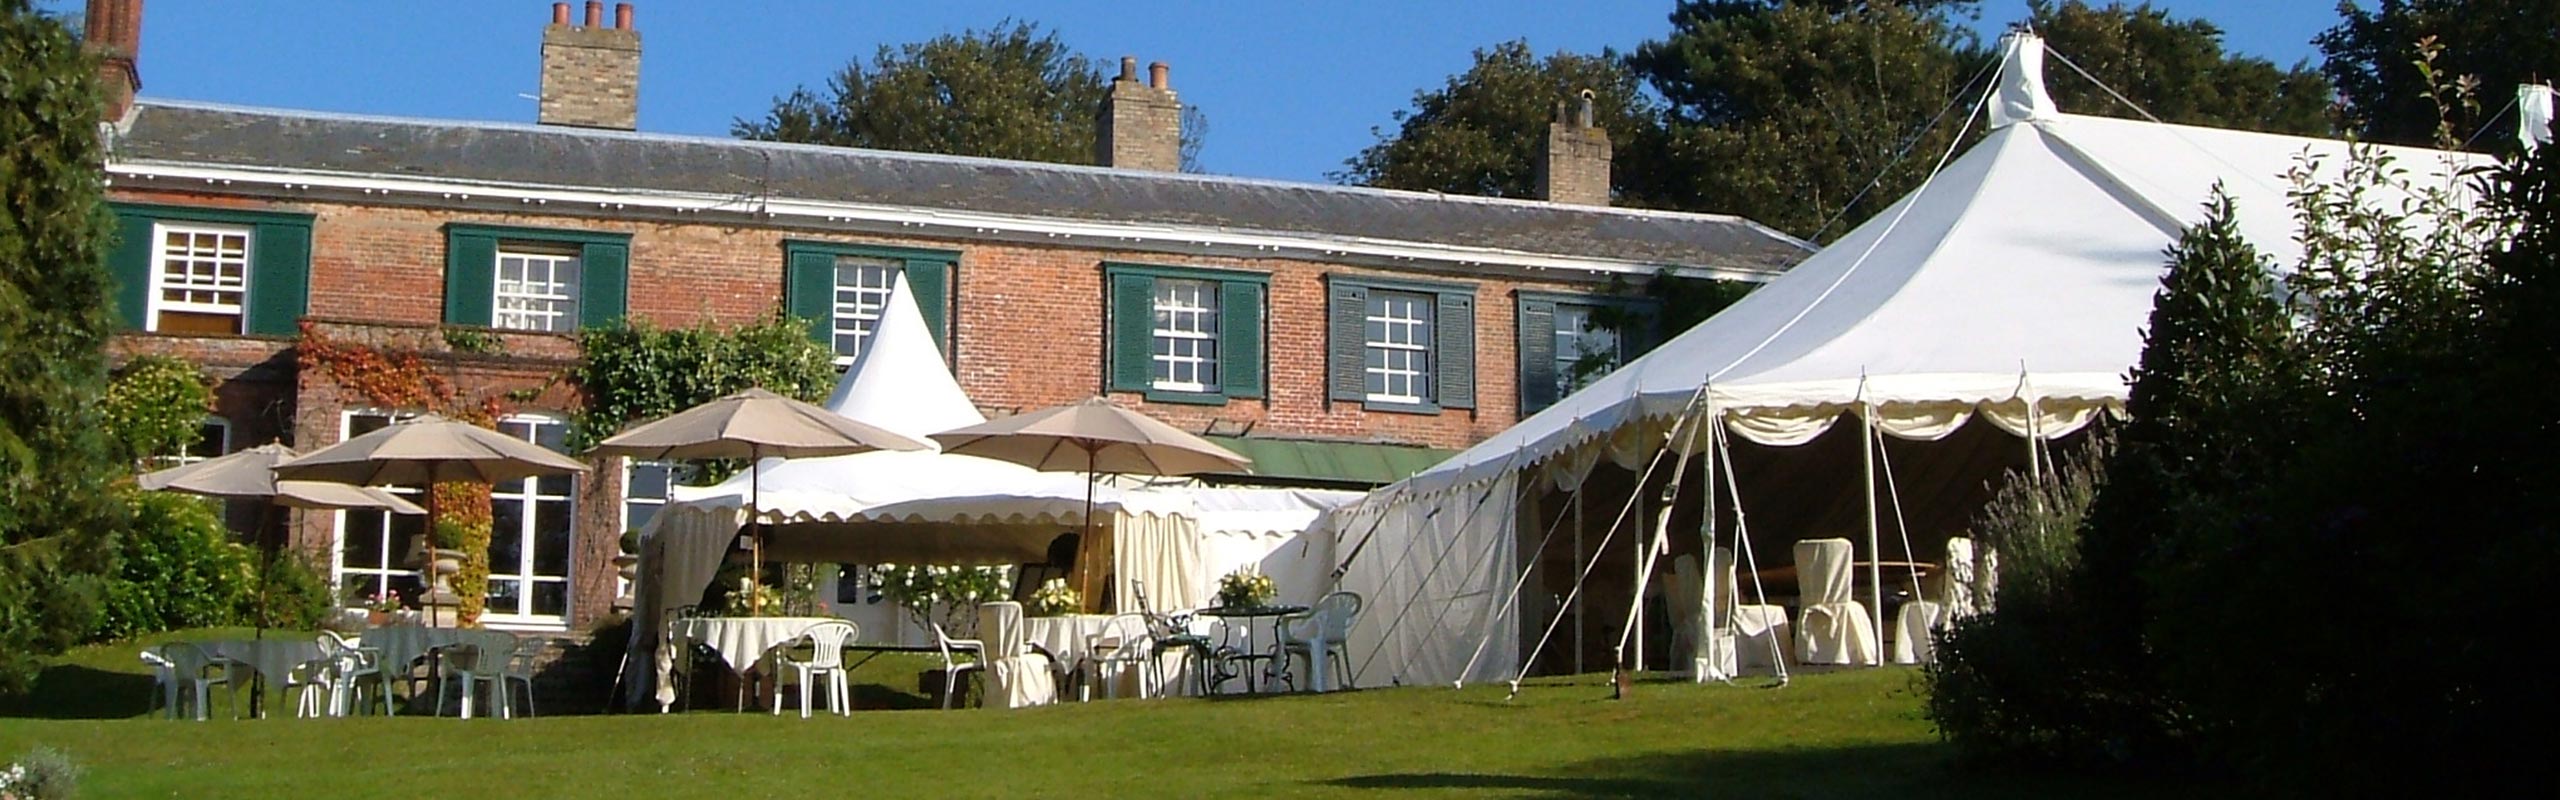 Party Tent Hire Norfolk